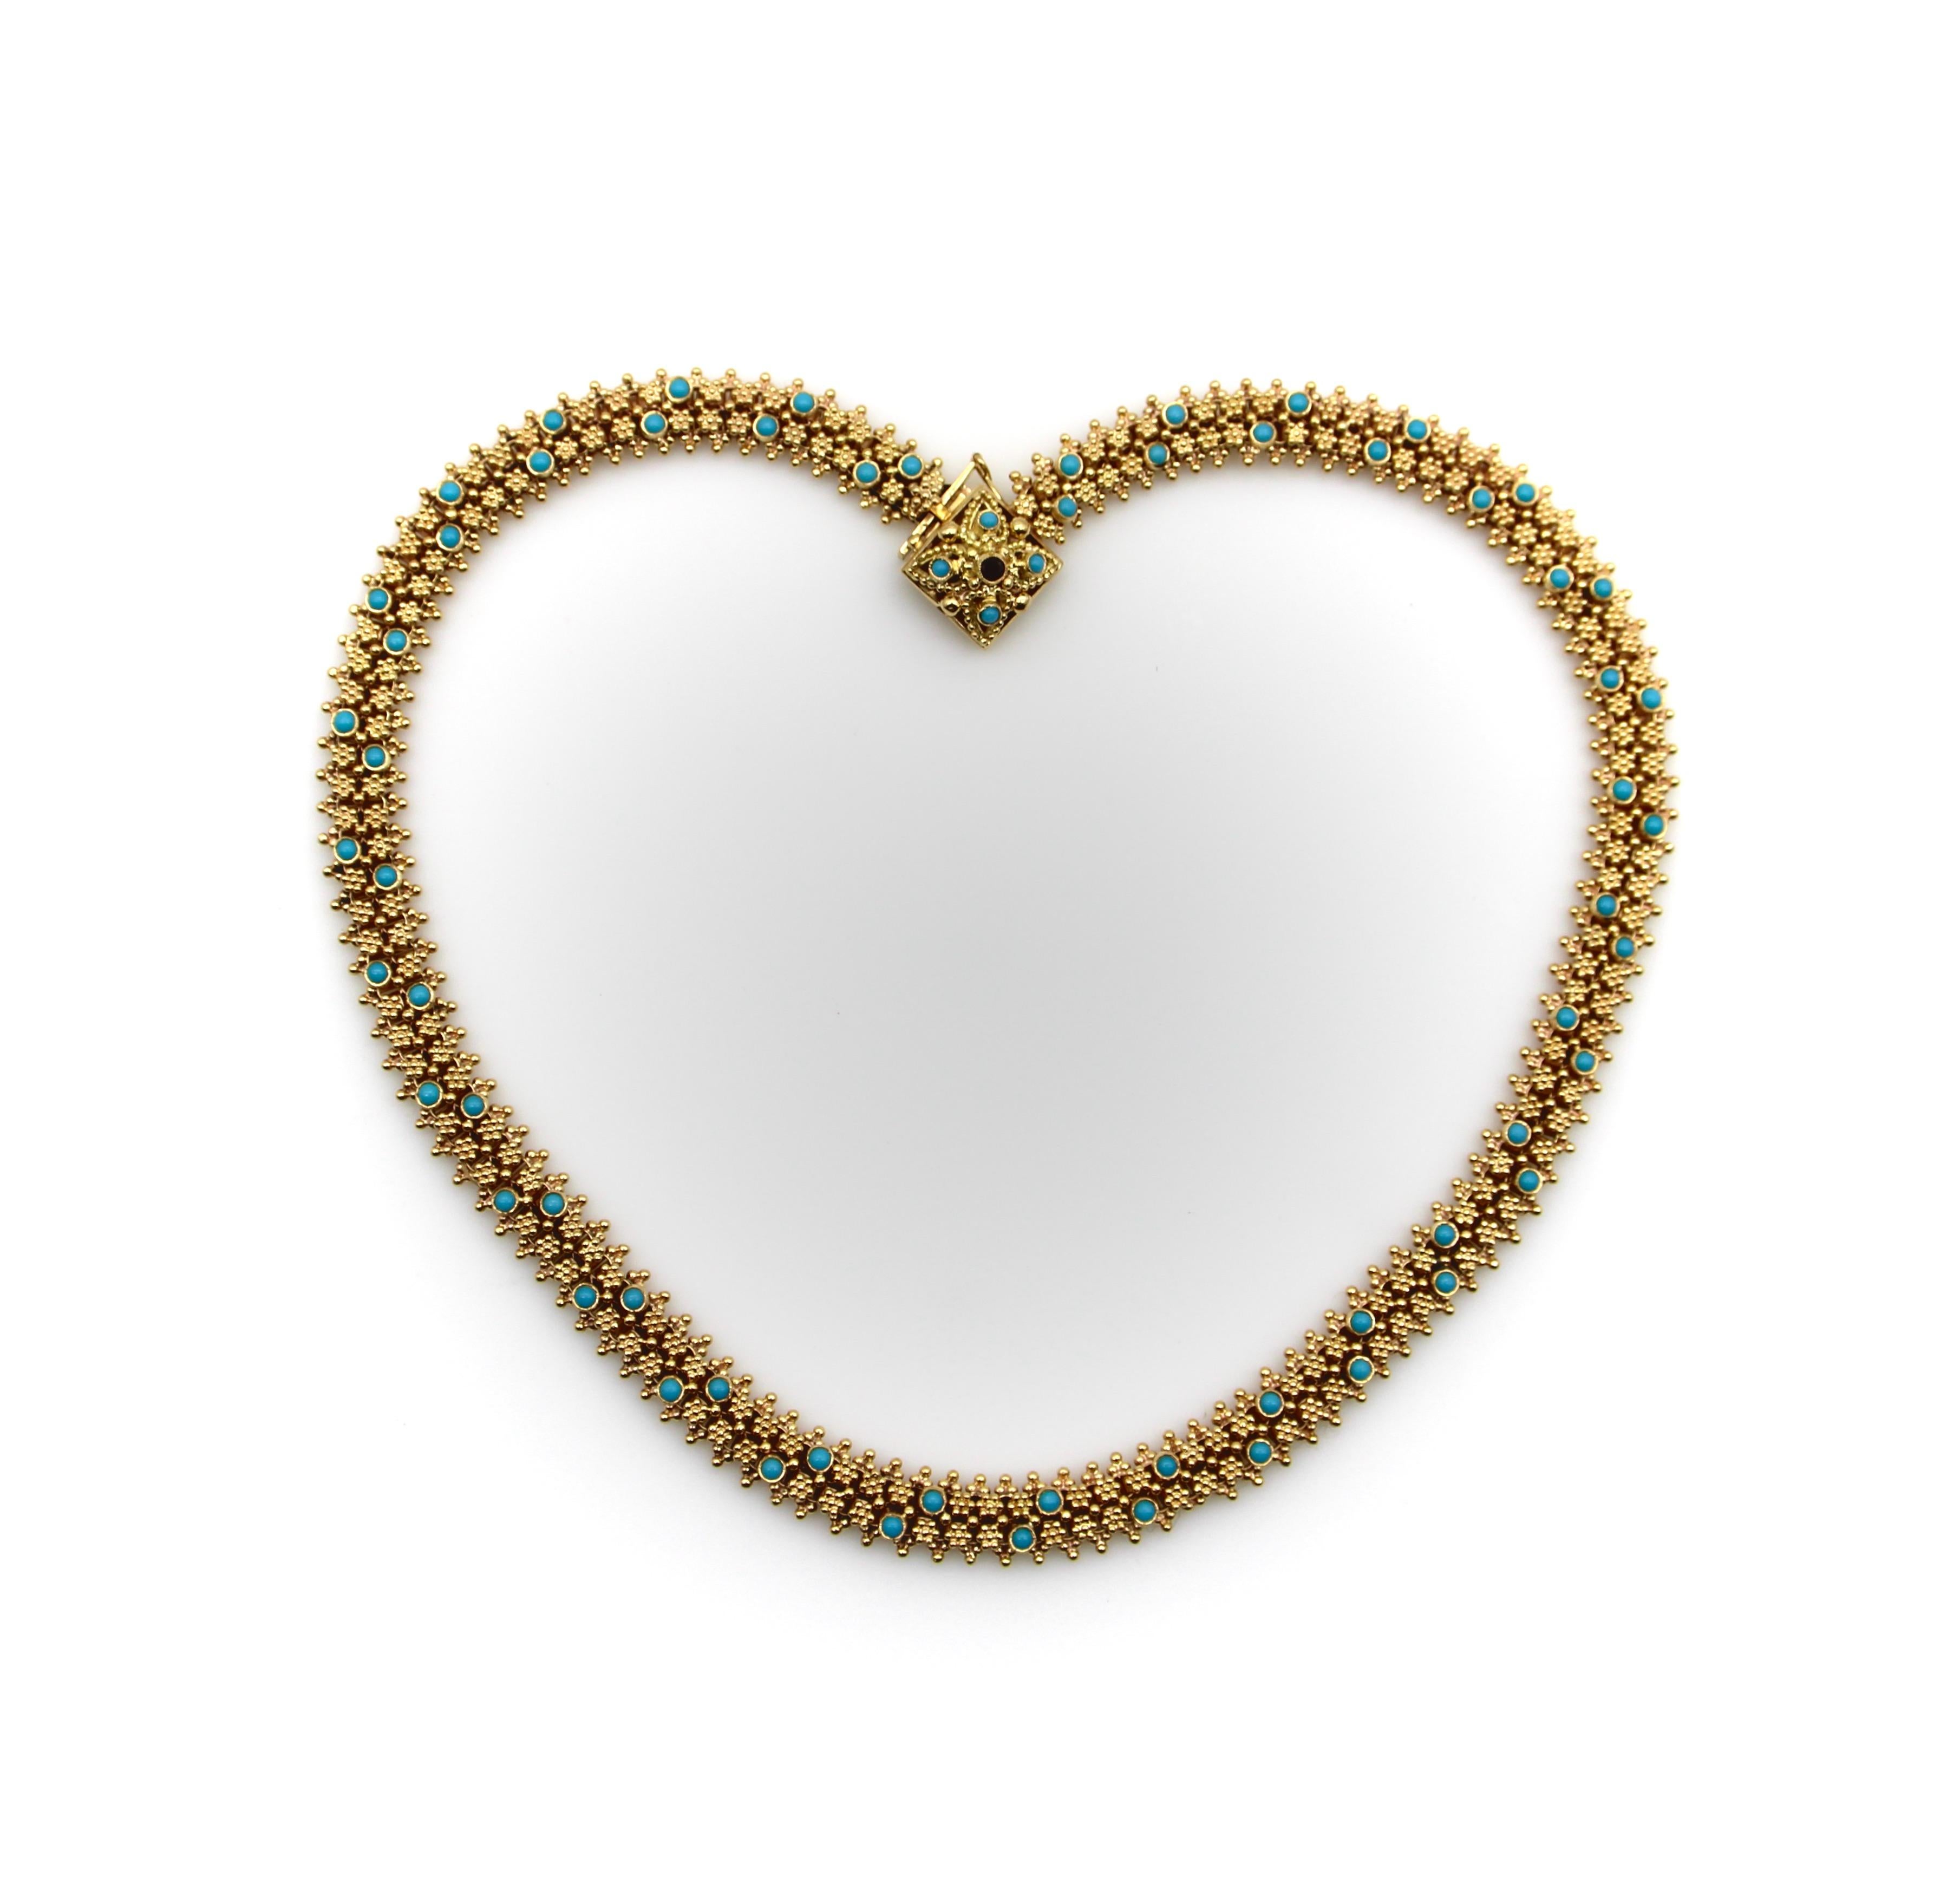 Etruscan Revival Portuguese Cannetille 19.2K Gold & Turquoise Necklace In Good Condition For Sale In Venice, CA